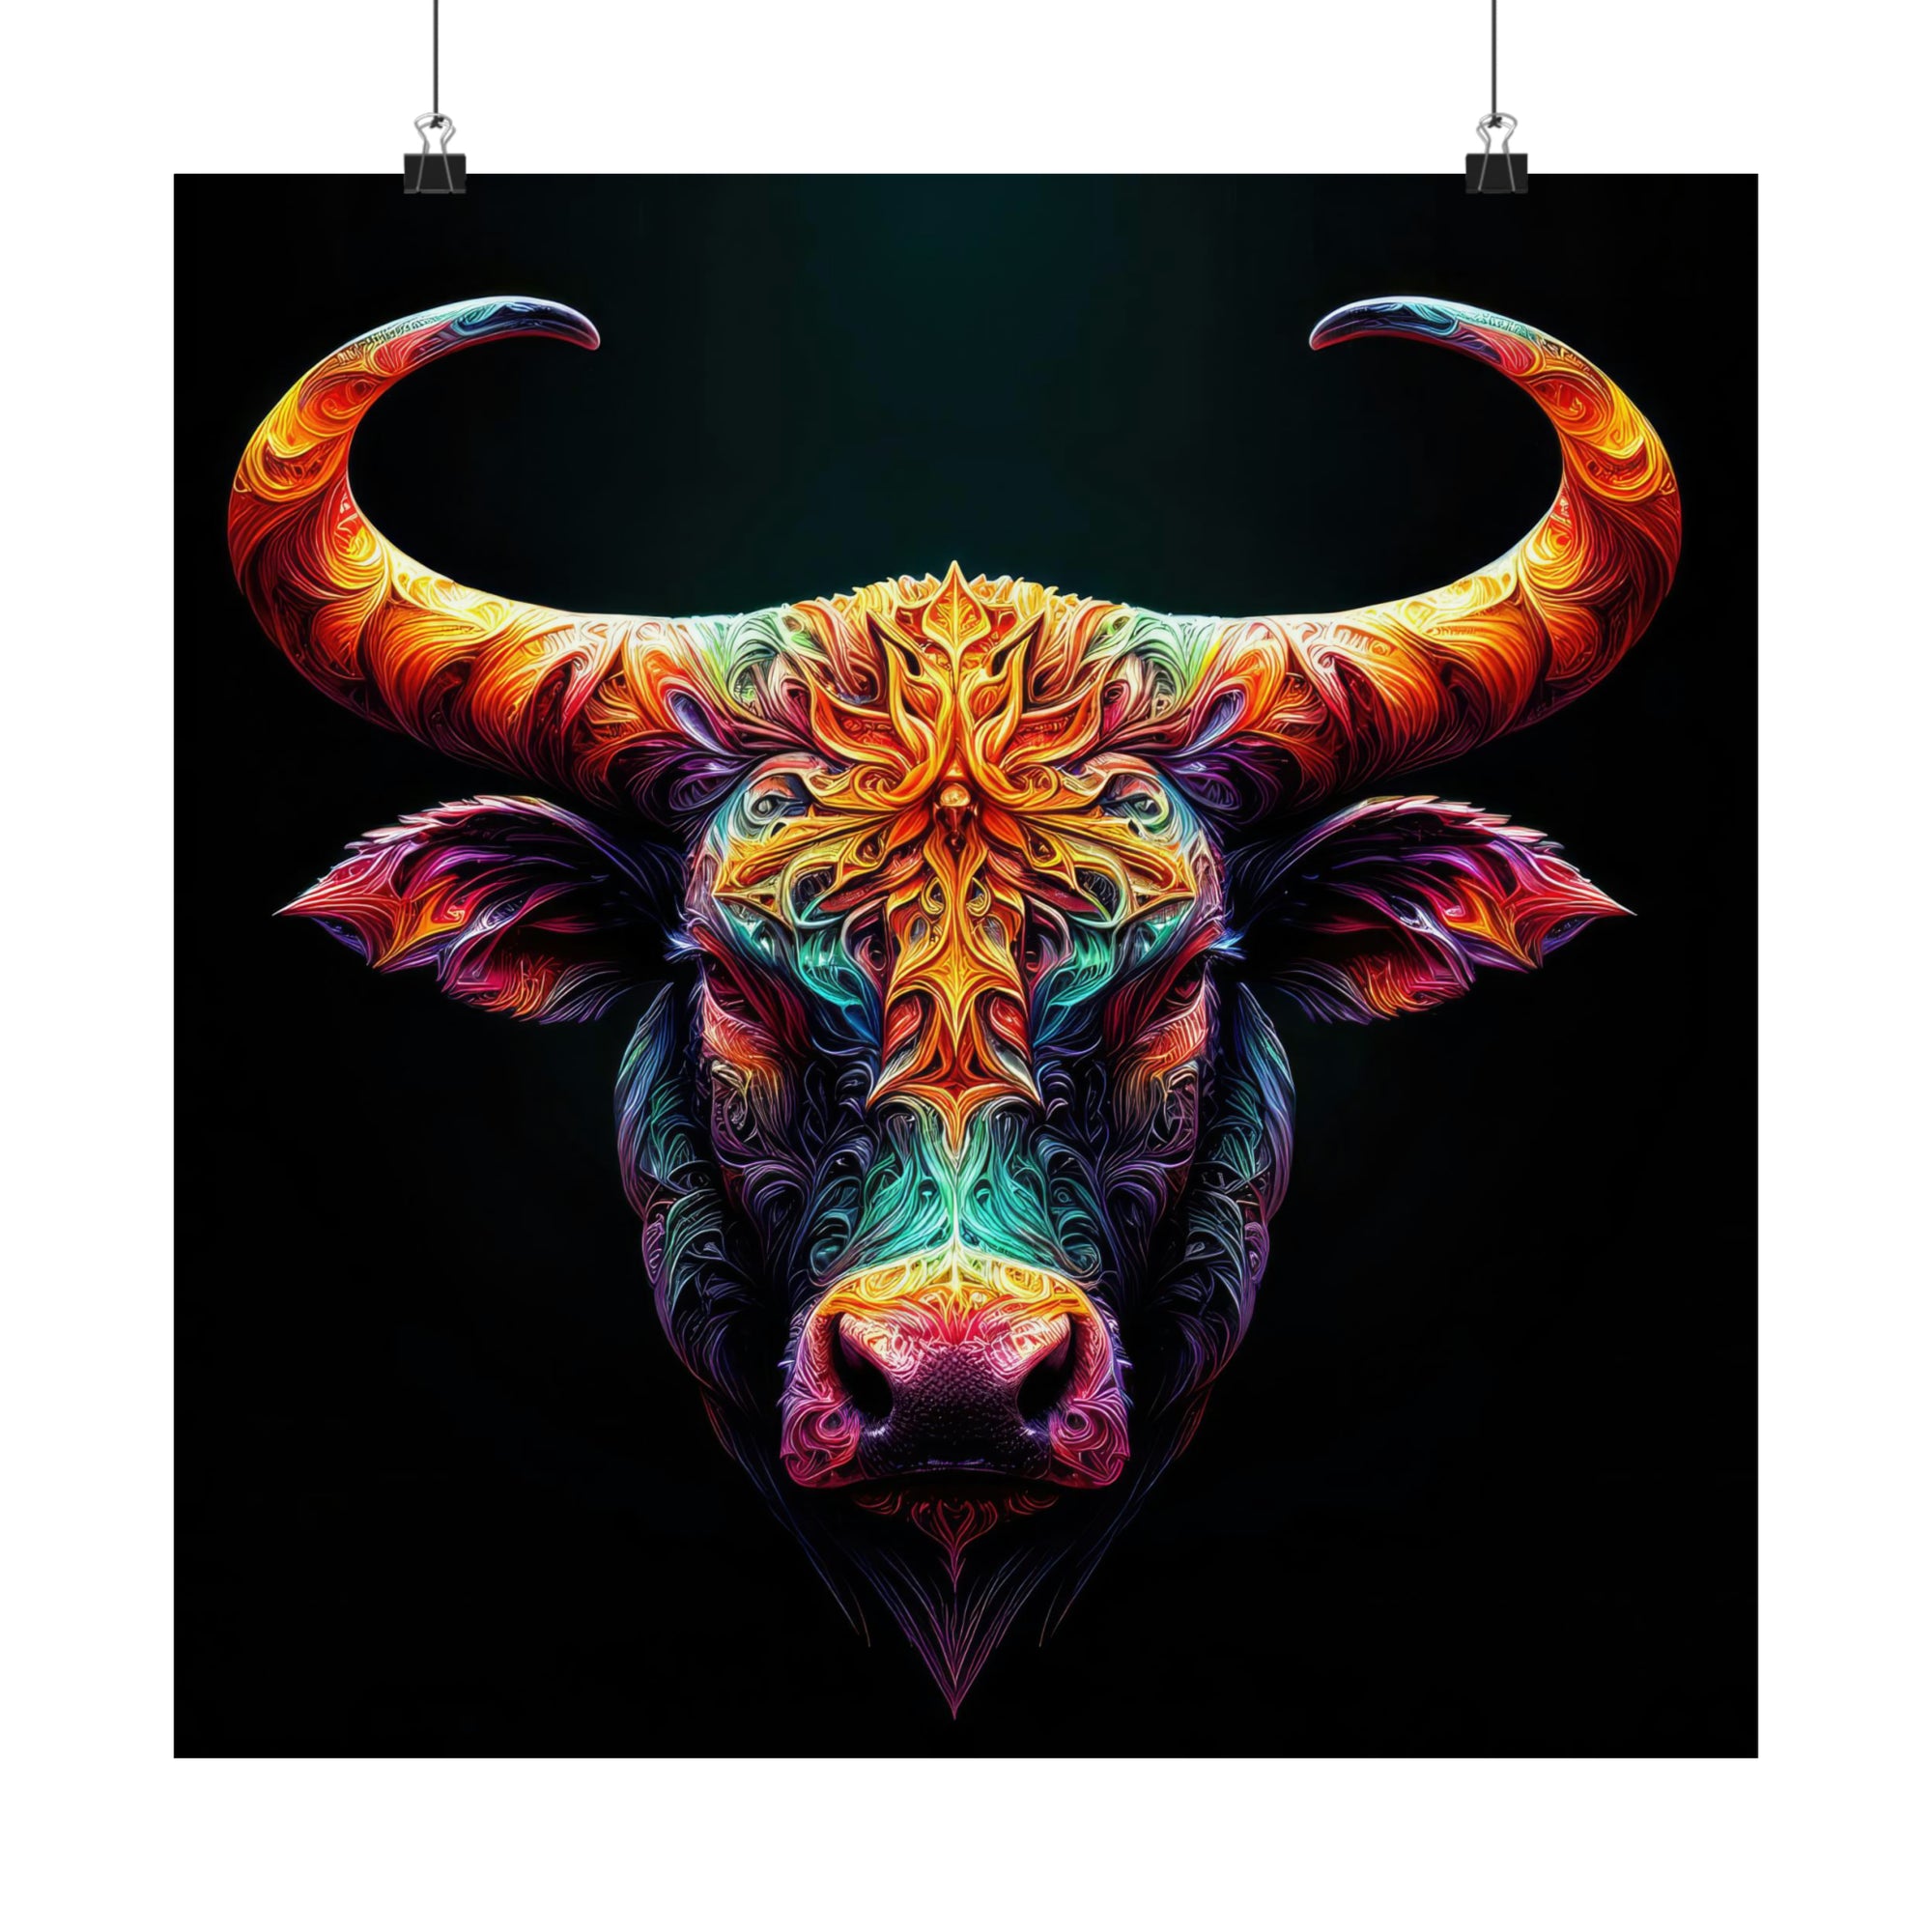 Spectral Taurus Poster